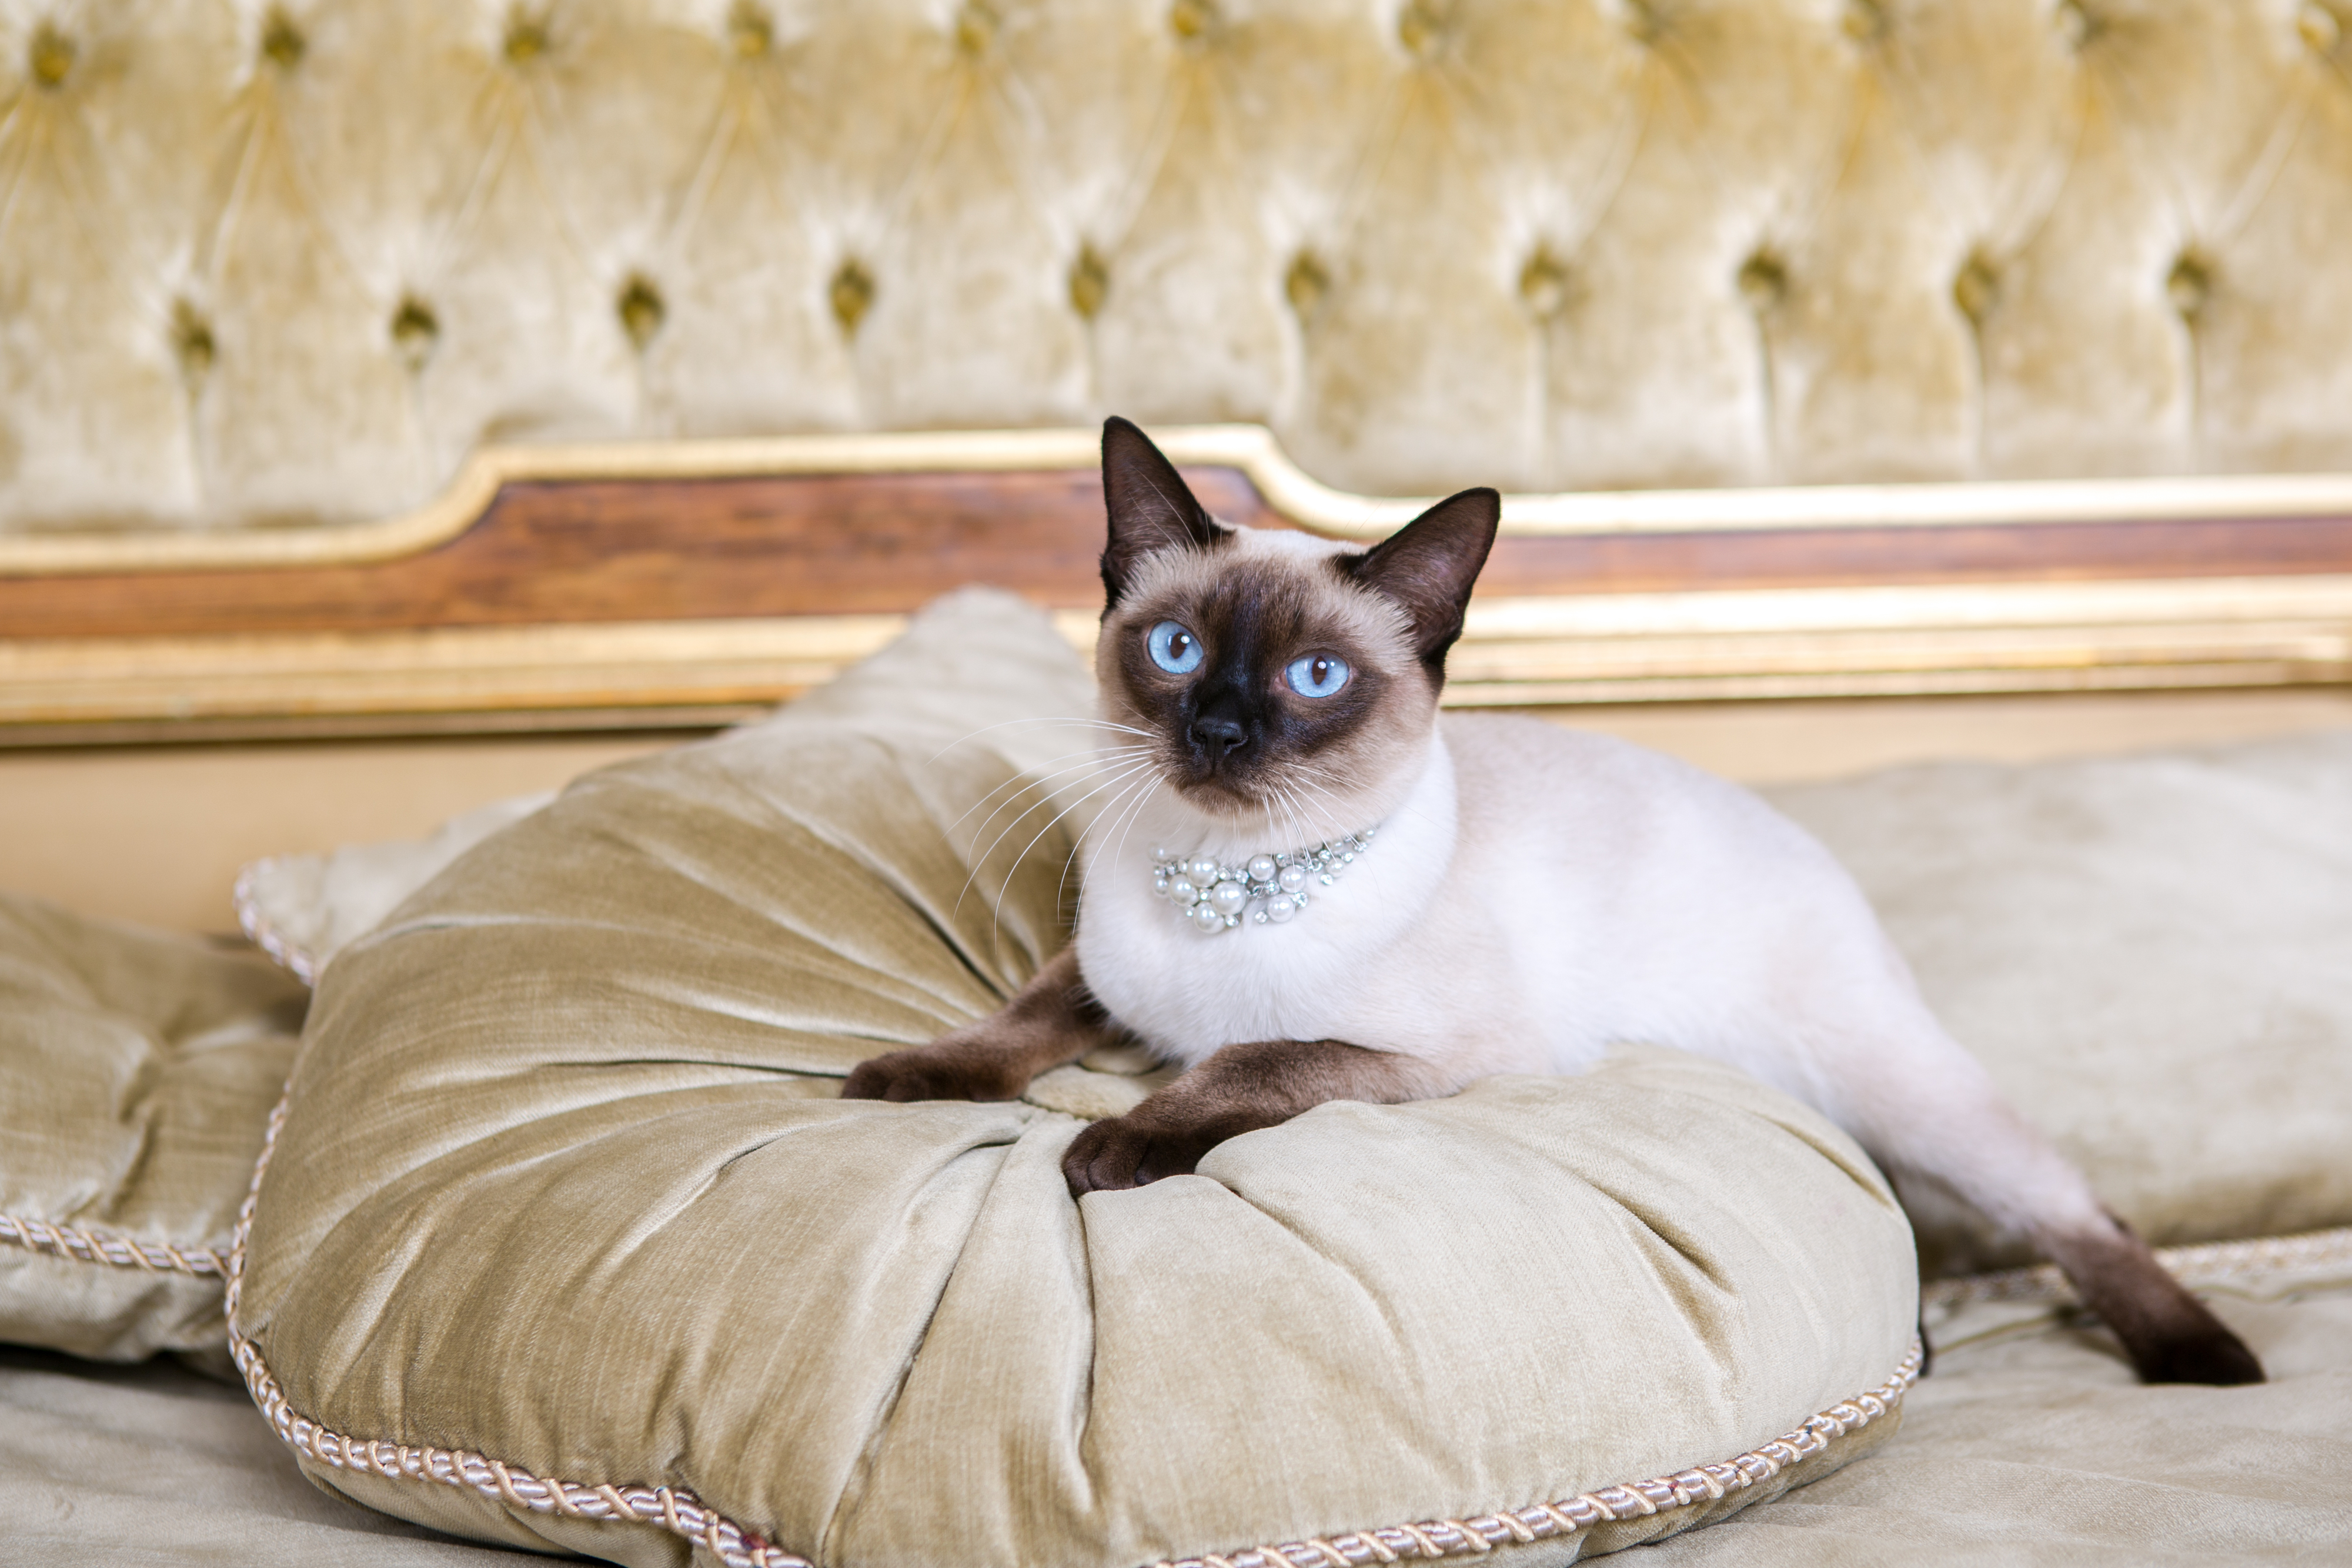 A Siamese cat wearing a pearl collar lies on a cushion with a gold-framed couch in the background